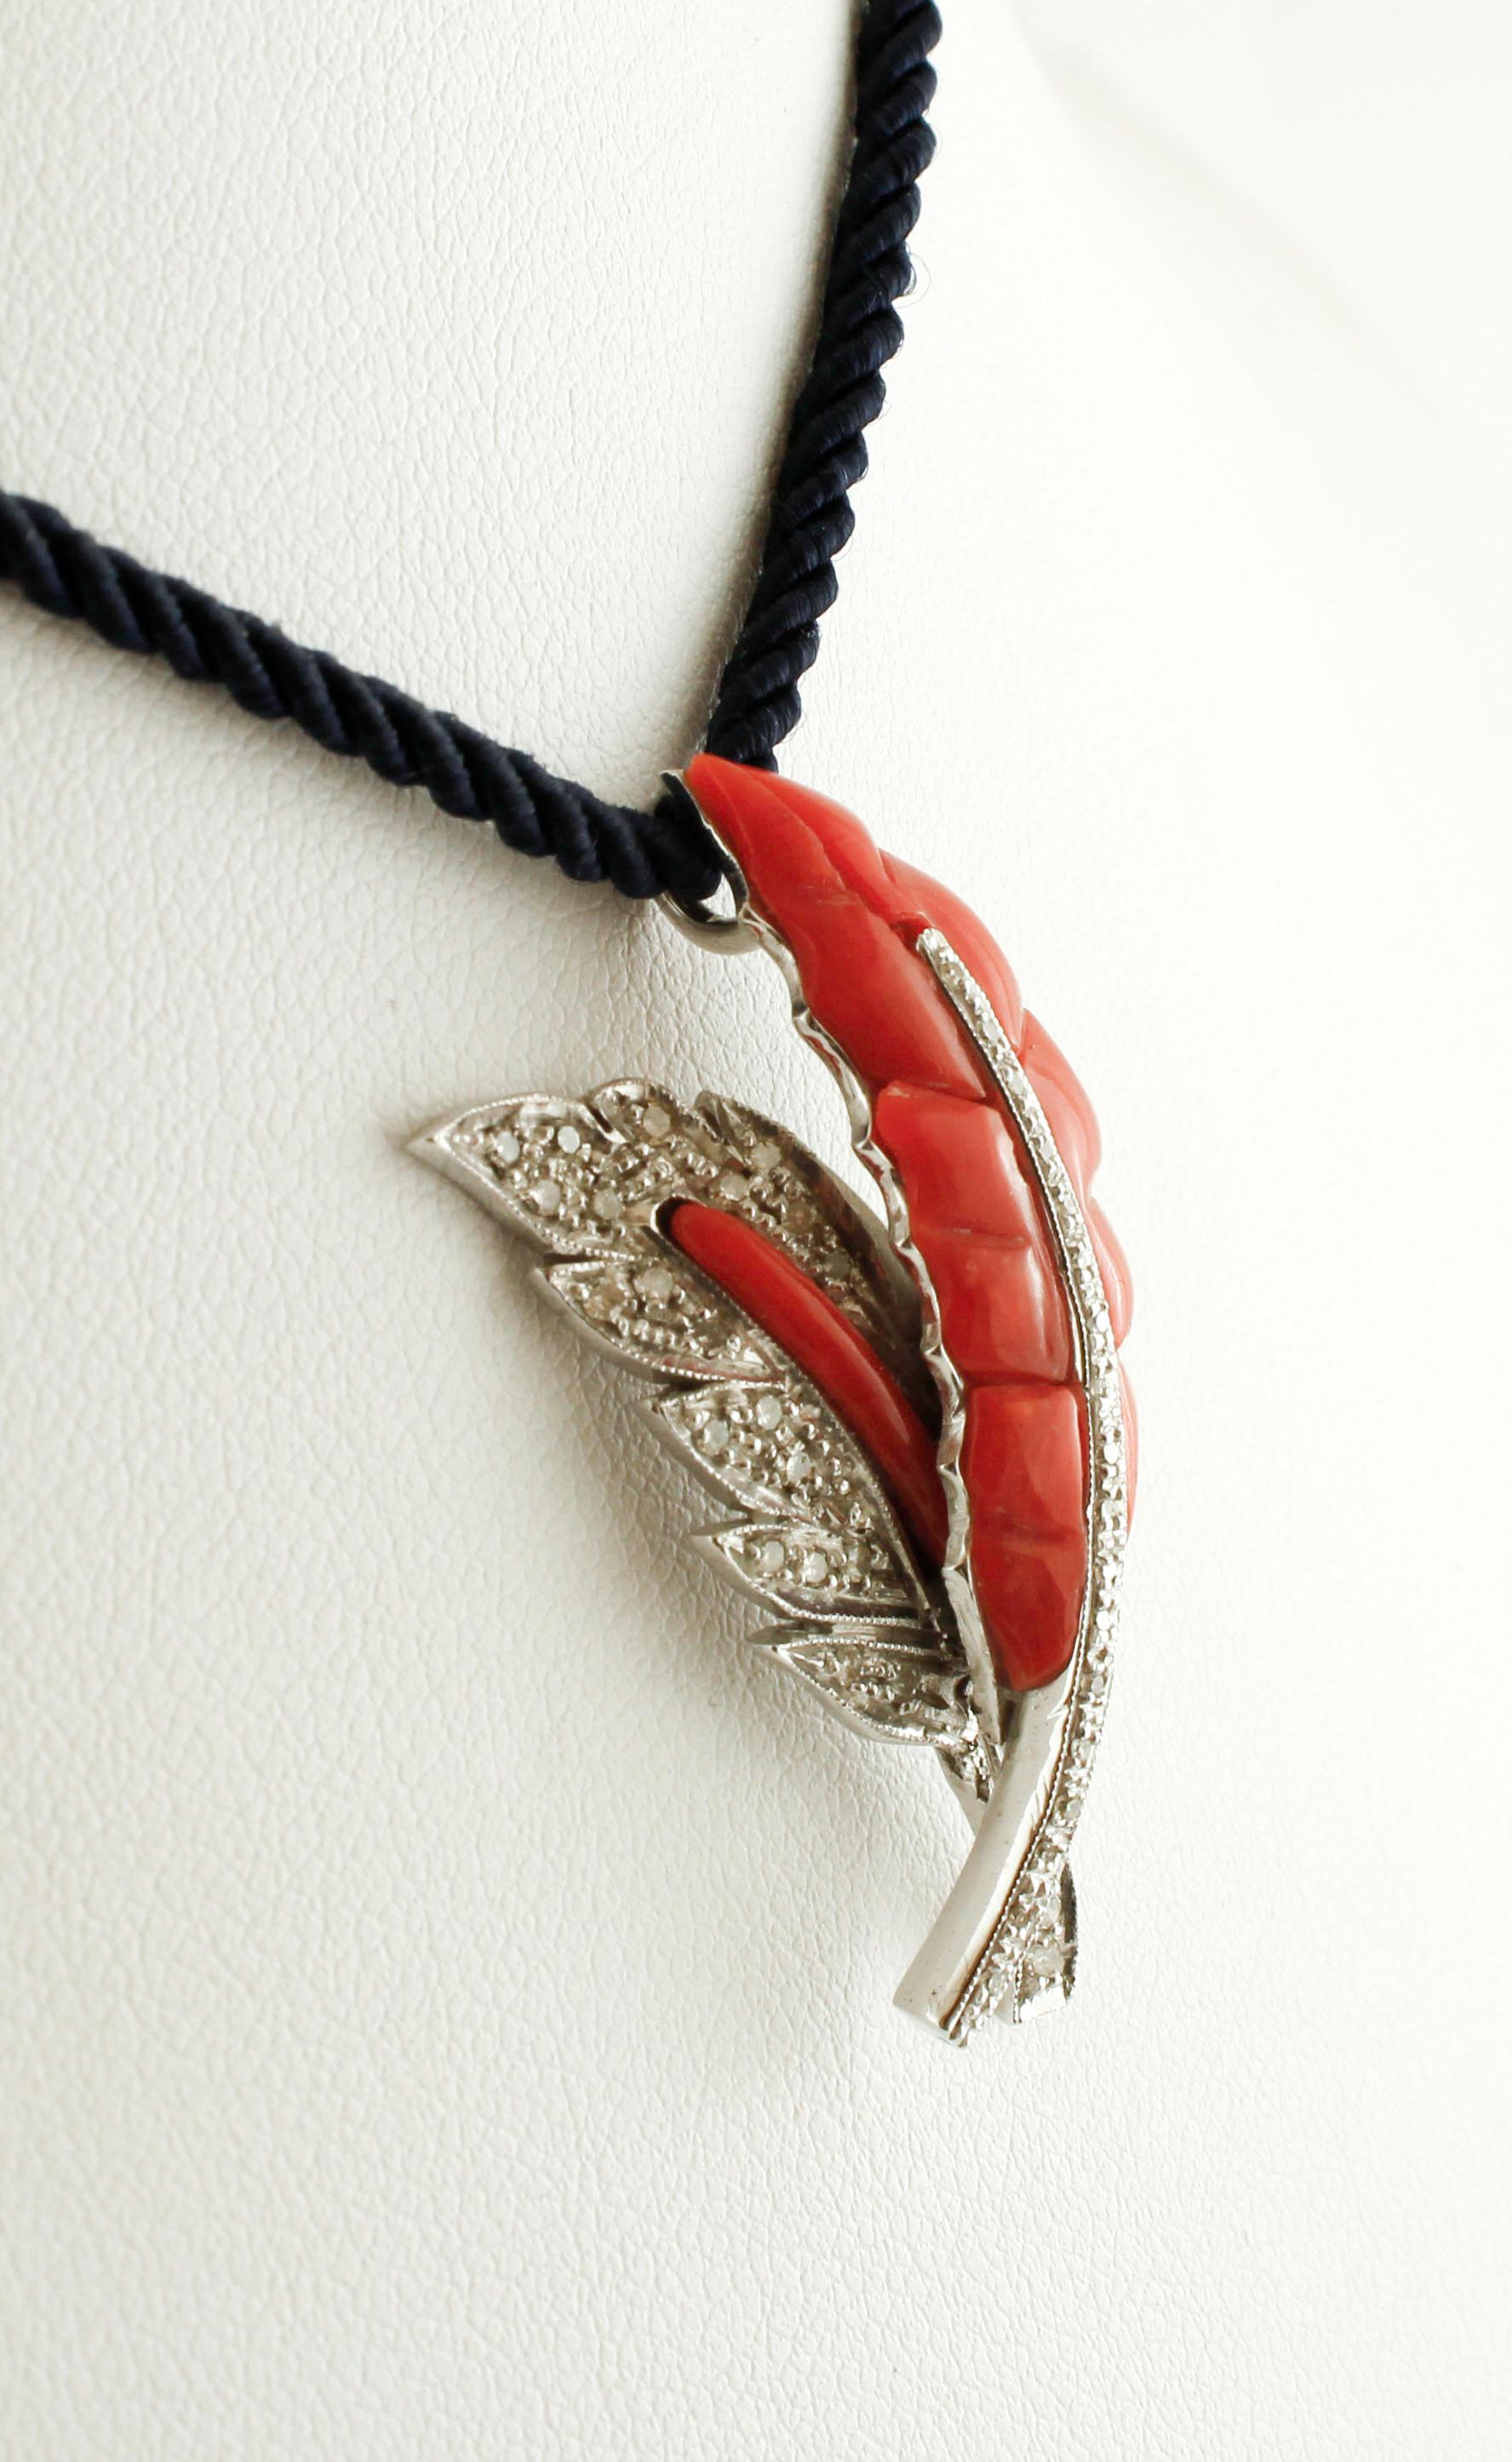 SHIPPING POLICY:
No additional costs will be added to this order.
Shipping costs will be totally covered by the seller (customs duties included).

Fashion pendant necklace with leaves shape created with one coral leaves with diamonds stem, and one